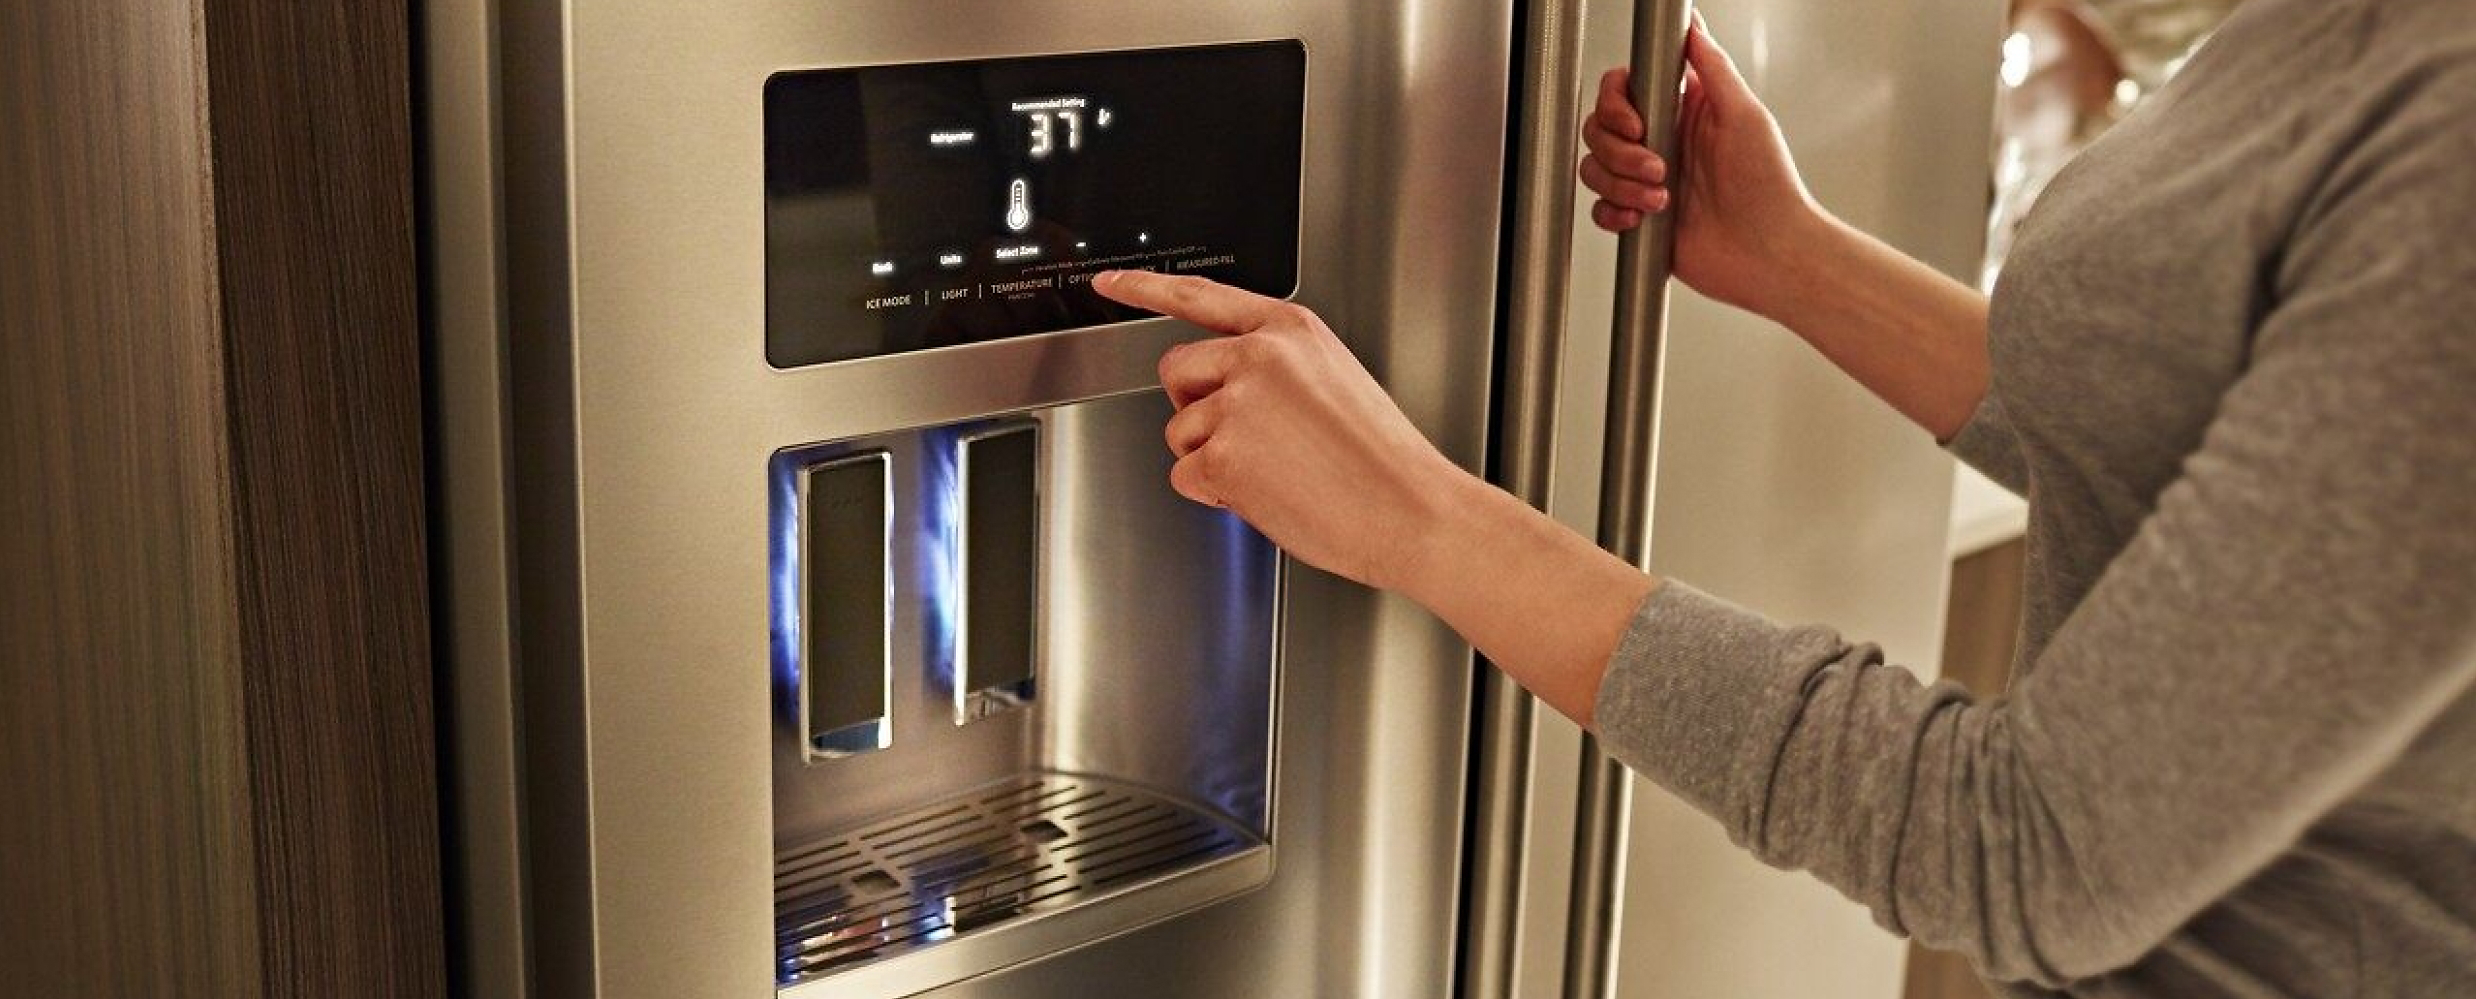 A person engaging with the touchscreen controls on the KitchenAid® French Door Bottom Mount Refrigerator.